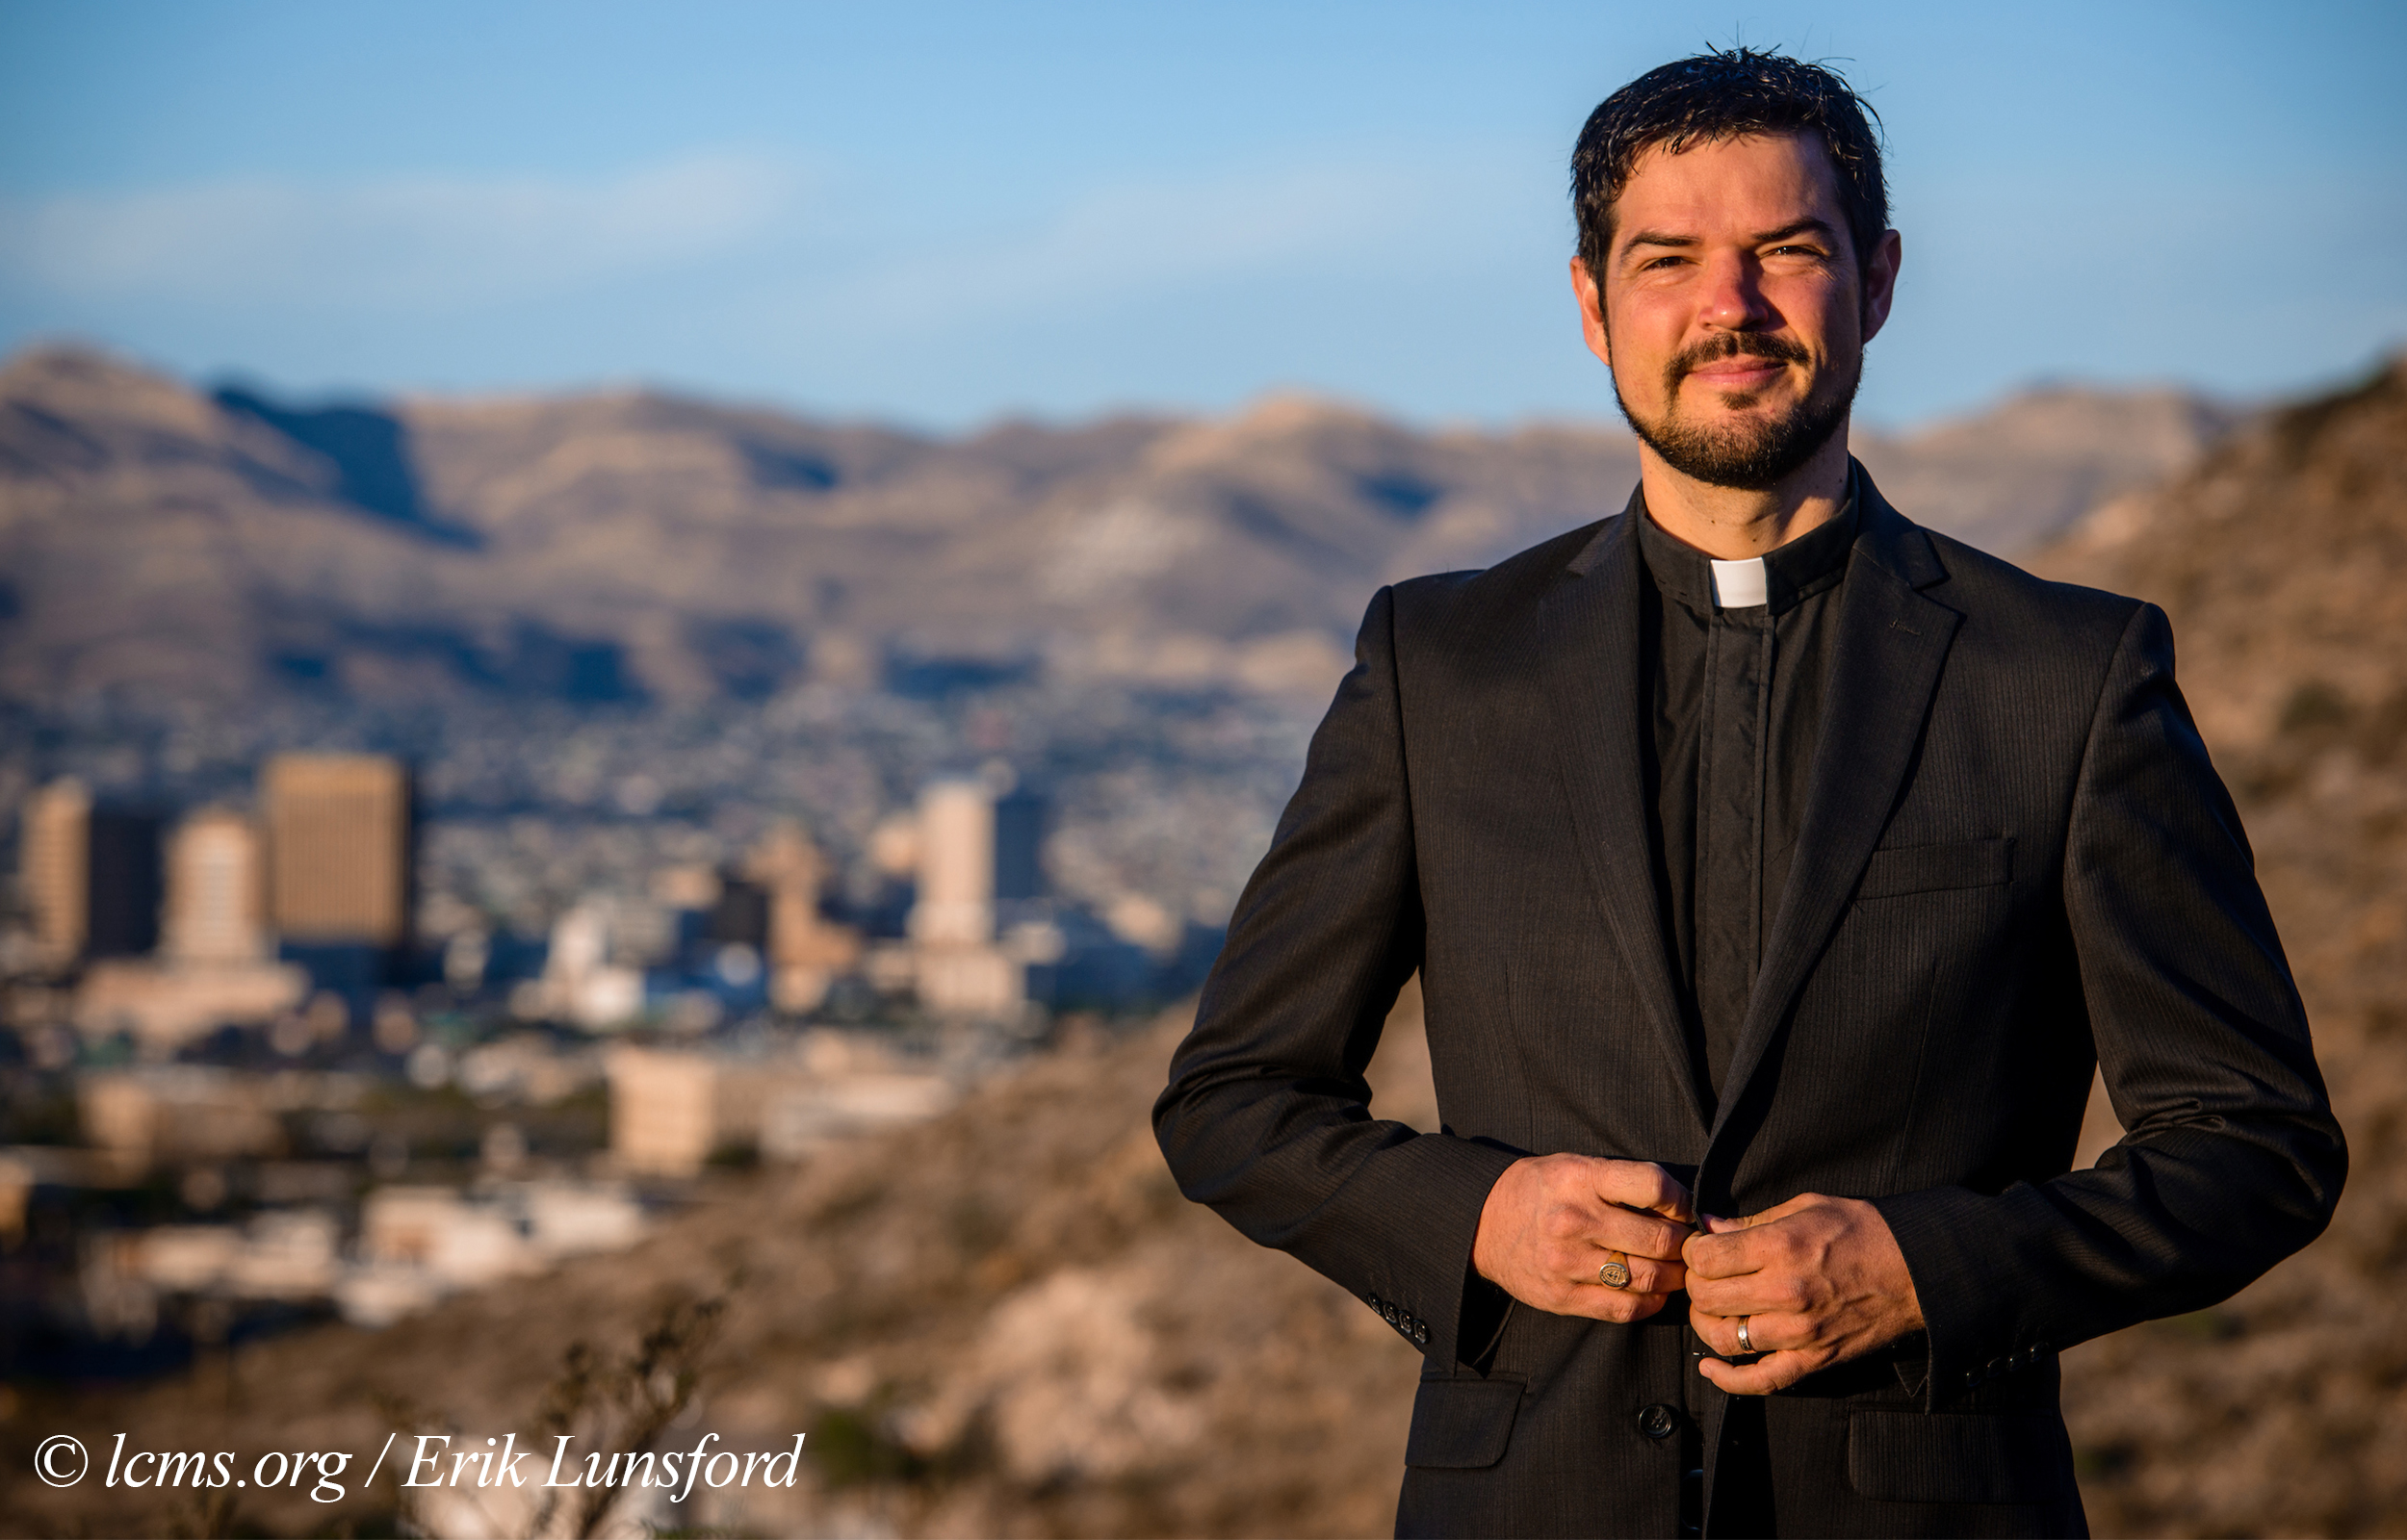 Portrait of the Rev. Stephen Heimer, pastor of Zion Lutheran Church, El Paso, Texas, and chief operating officer of Ysleta Lutheran Mission Human Care, on Sunday, May 22, 2016, in El Paso, Texas. LCMS Communications/Erik M. Lunsford